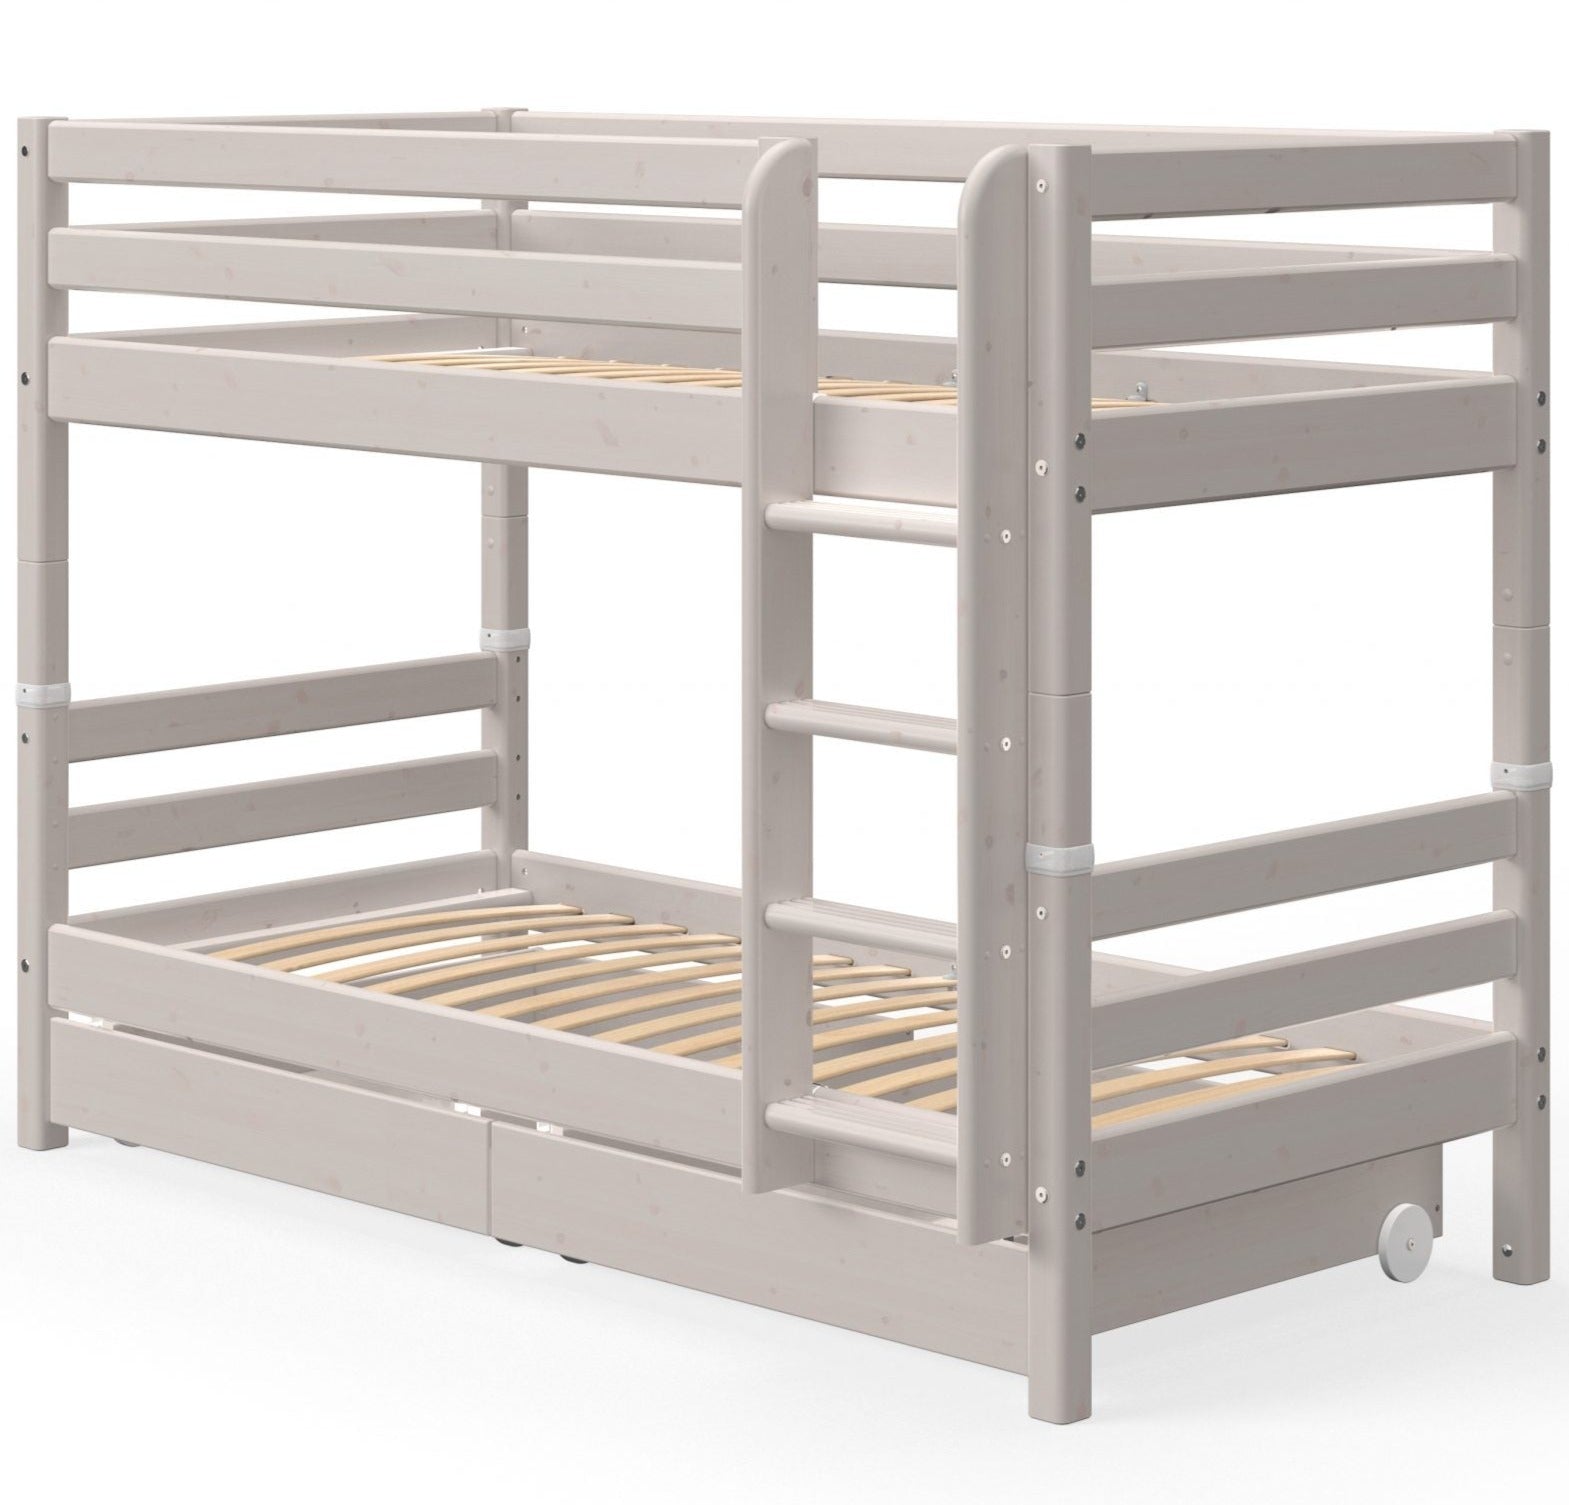 Flexa Classic Bunk Bed with Optional Drawers – Available in 2 colours